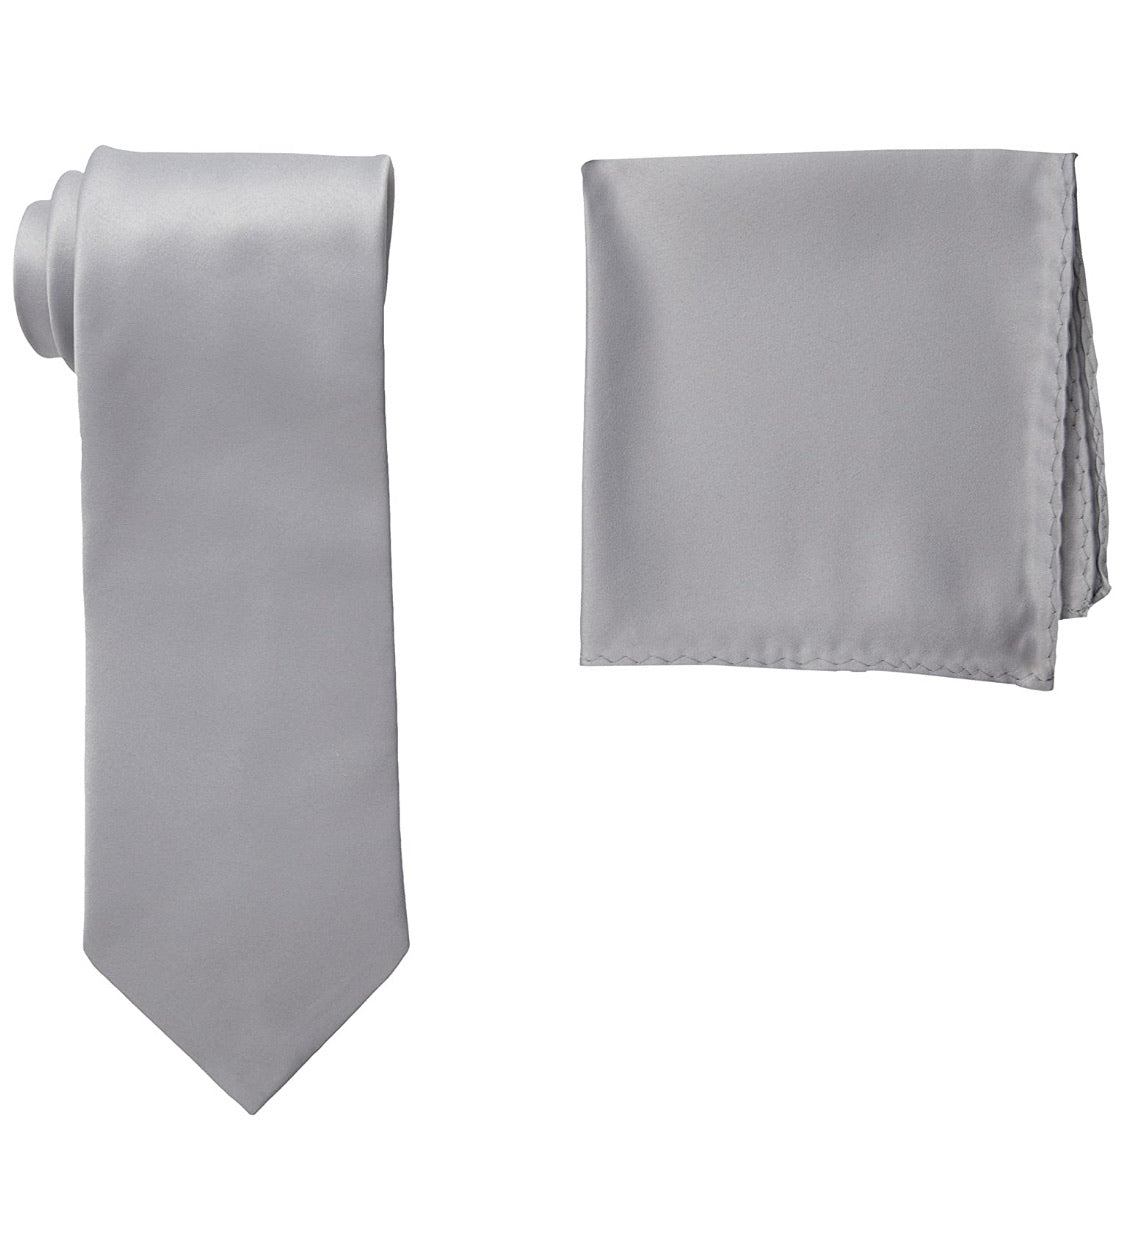 Stacy Adams Solid Grey Tie and Hanky - On Time Fashions Tuscaloosa